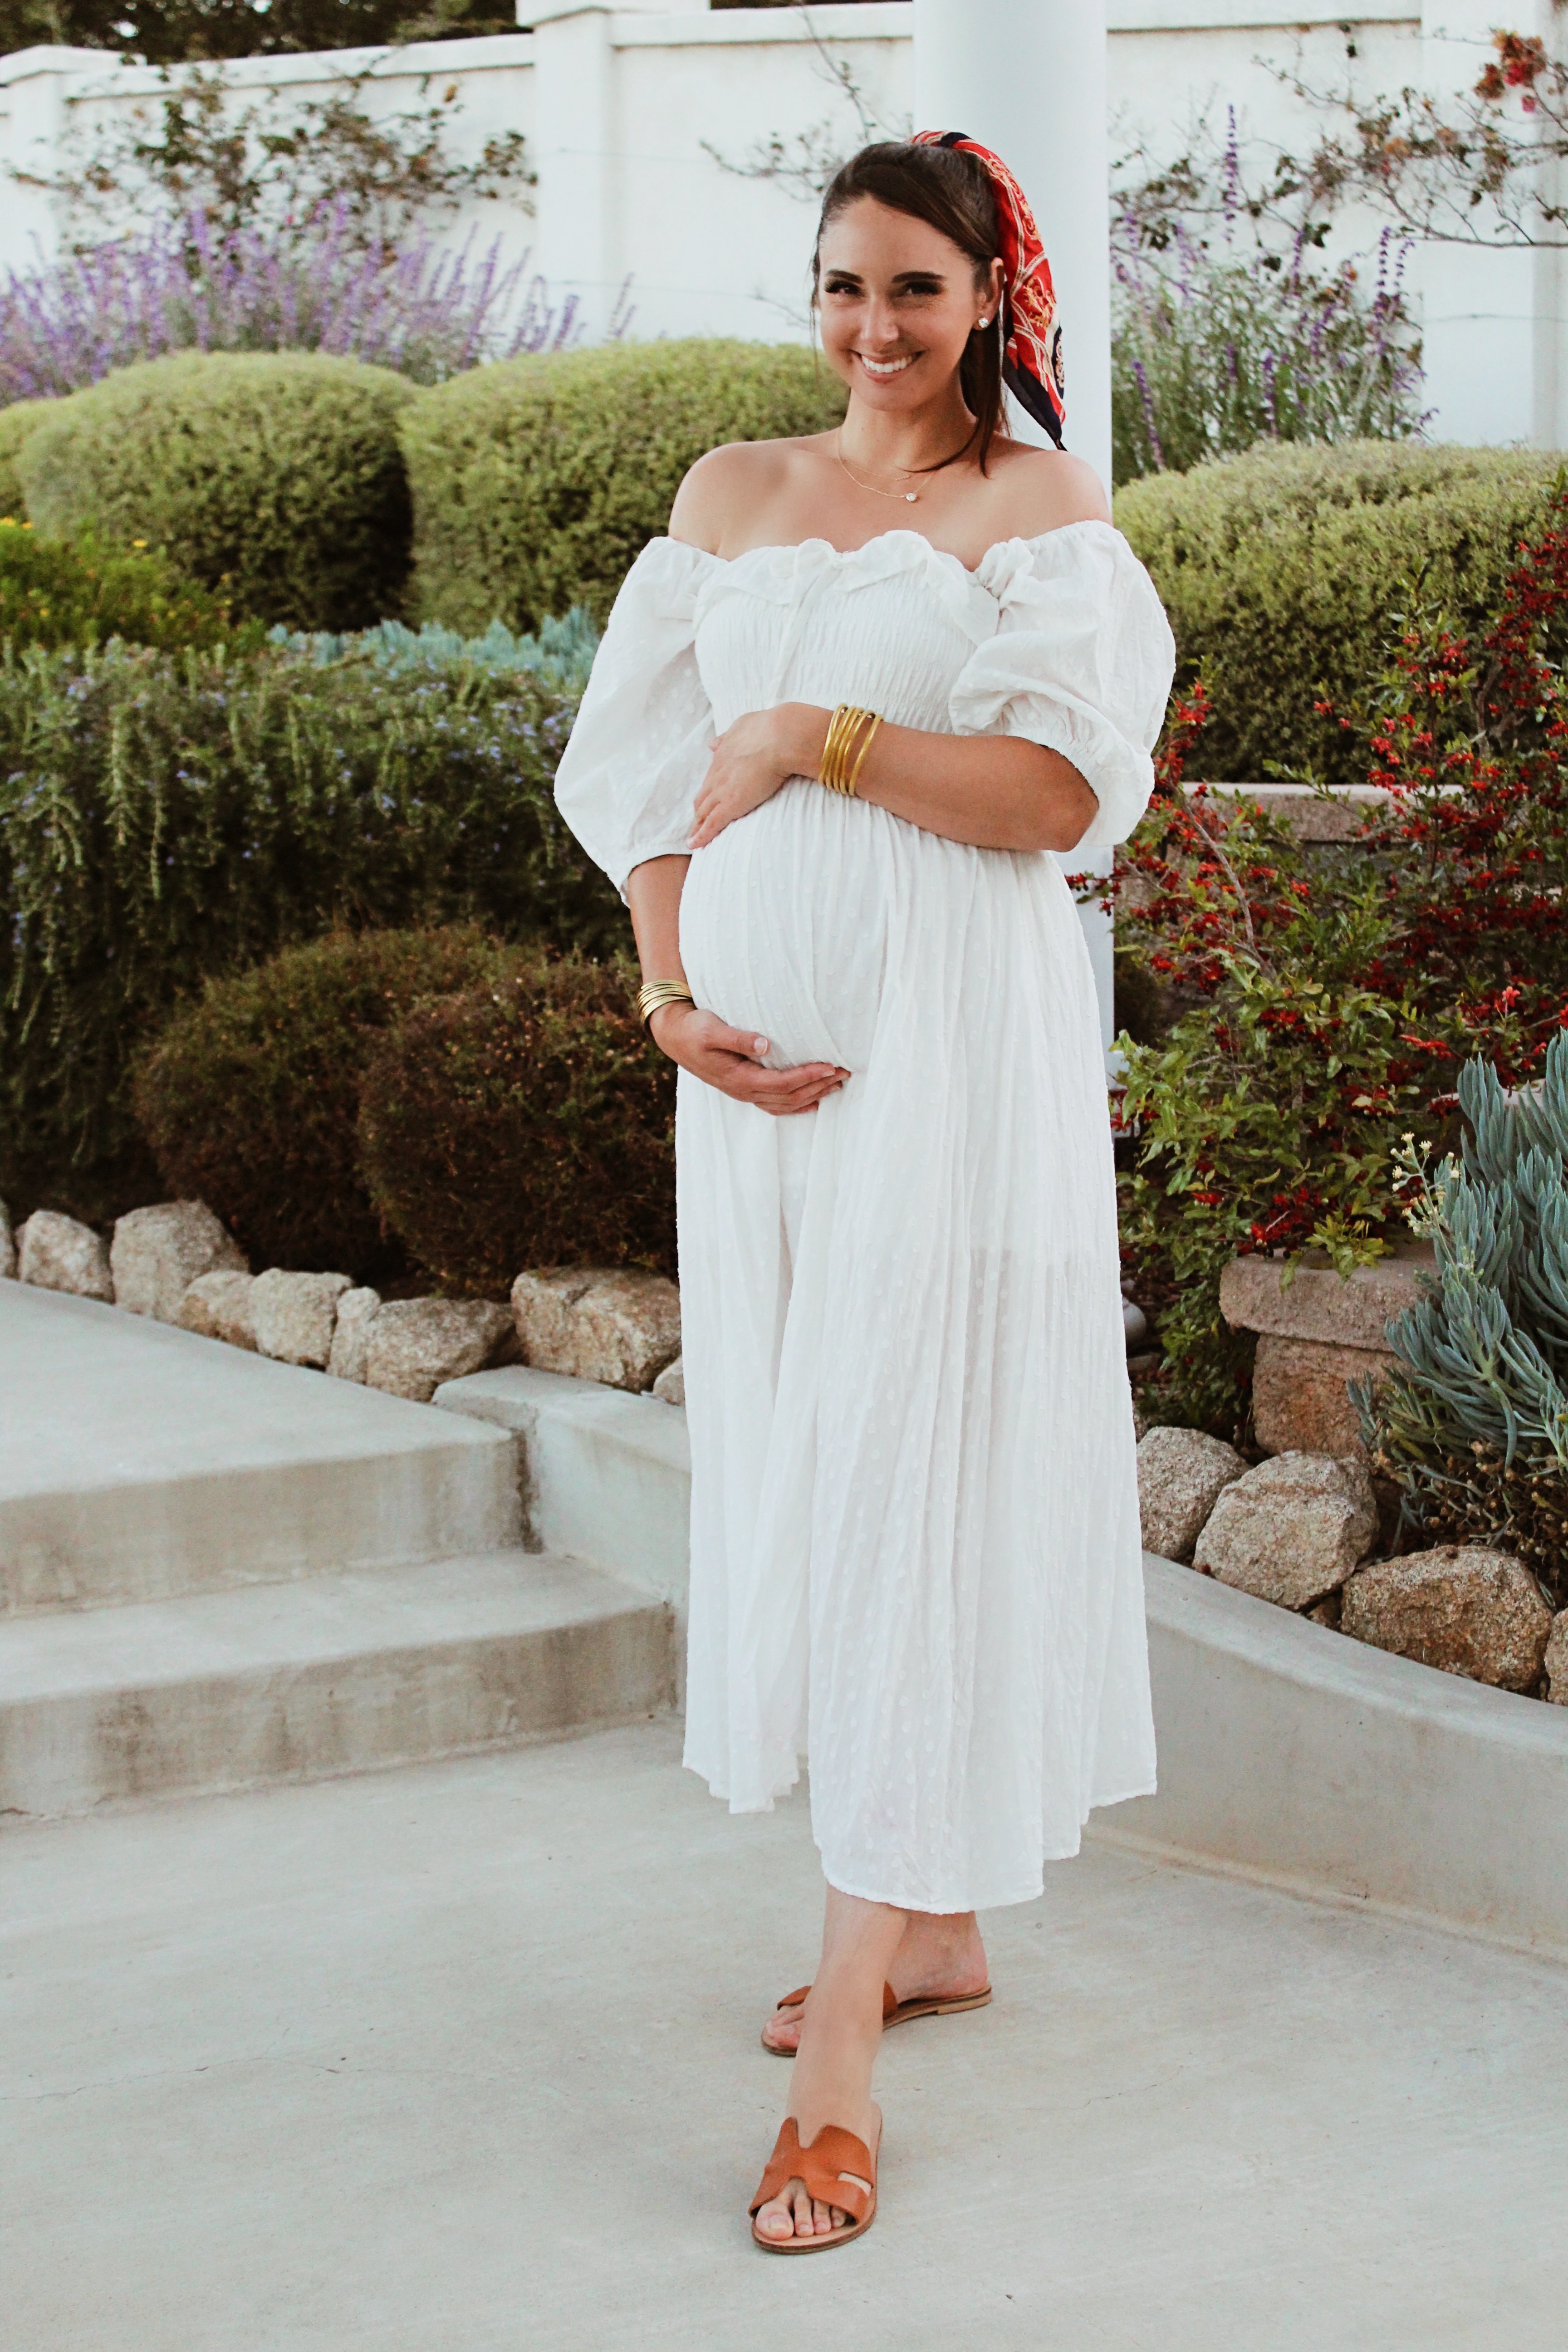 Maternity Style-4th of July Maternity Summer Outfits Everyday Style Street style white flowy off the shoulder dress 1